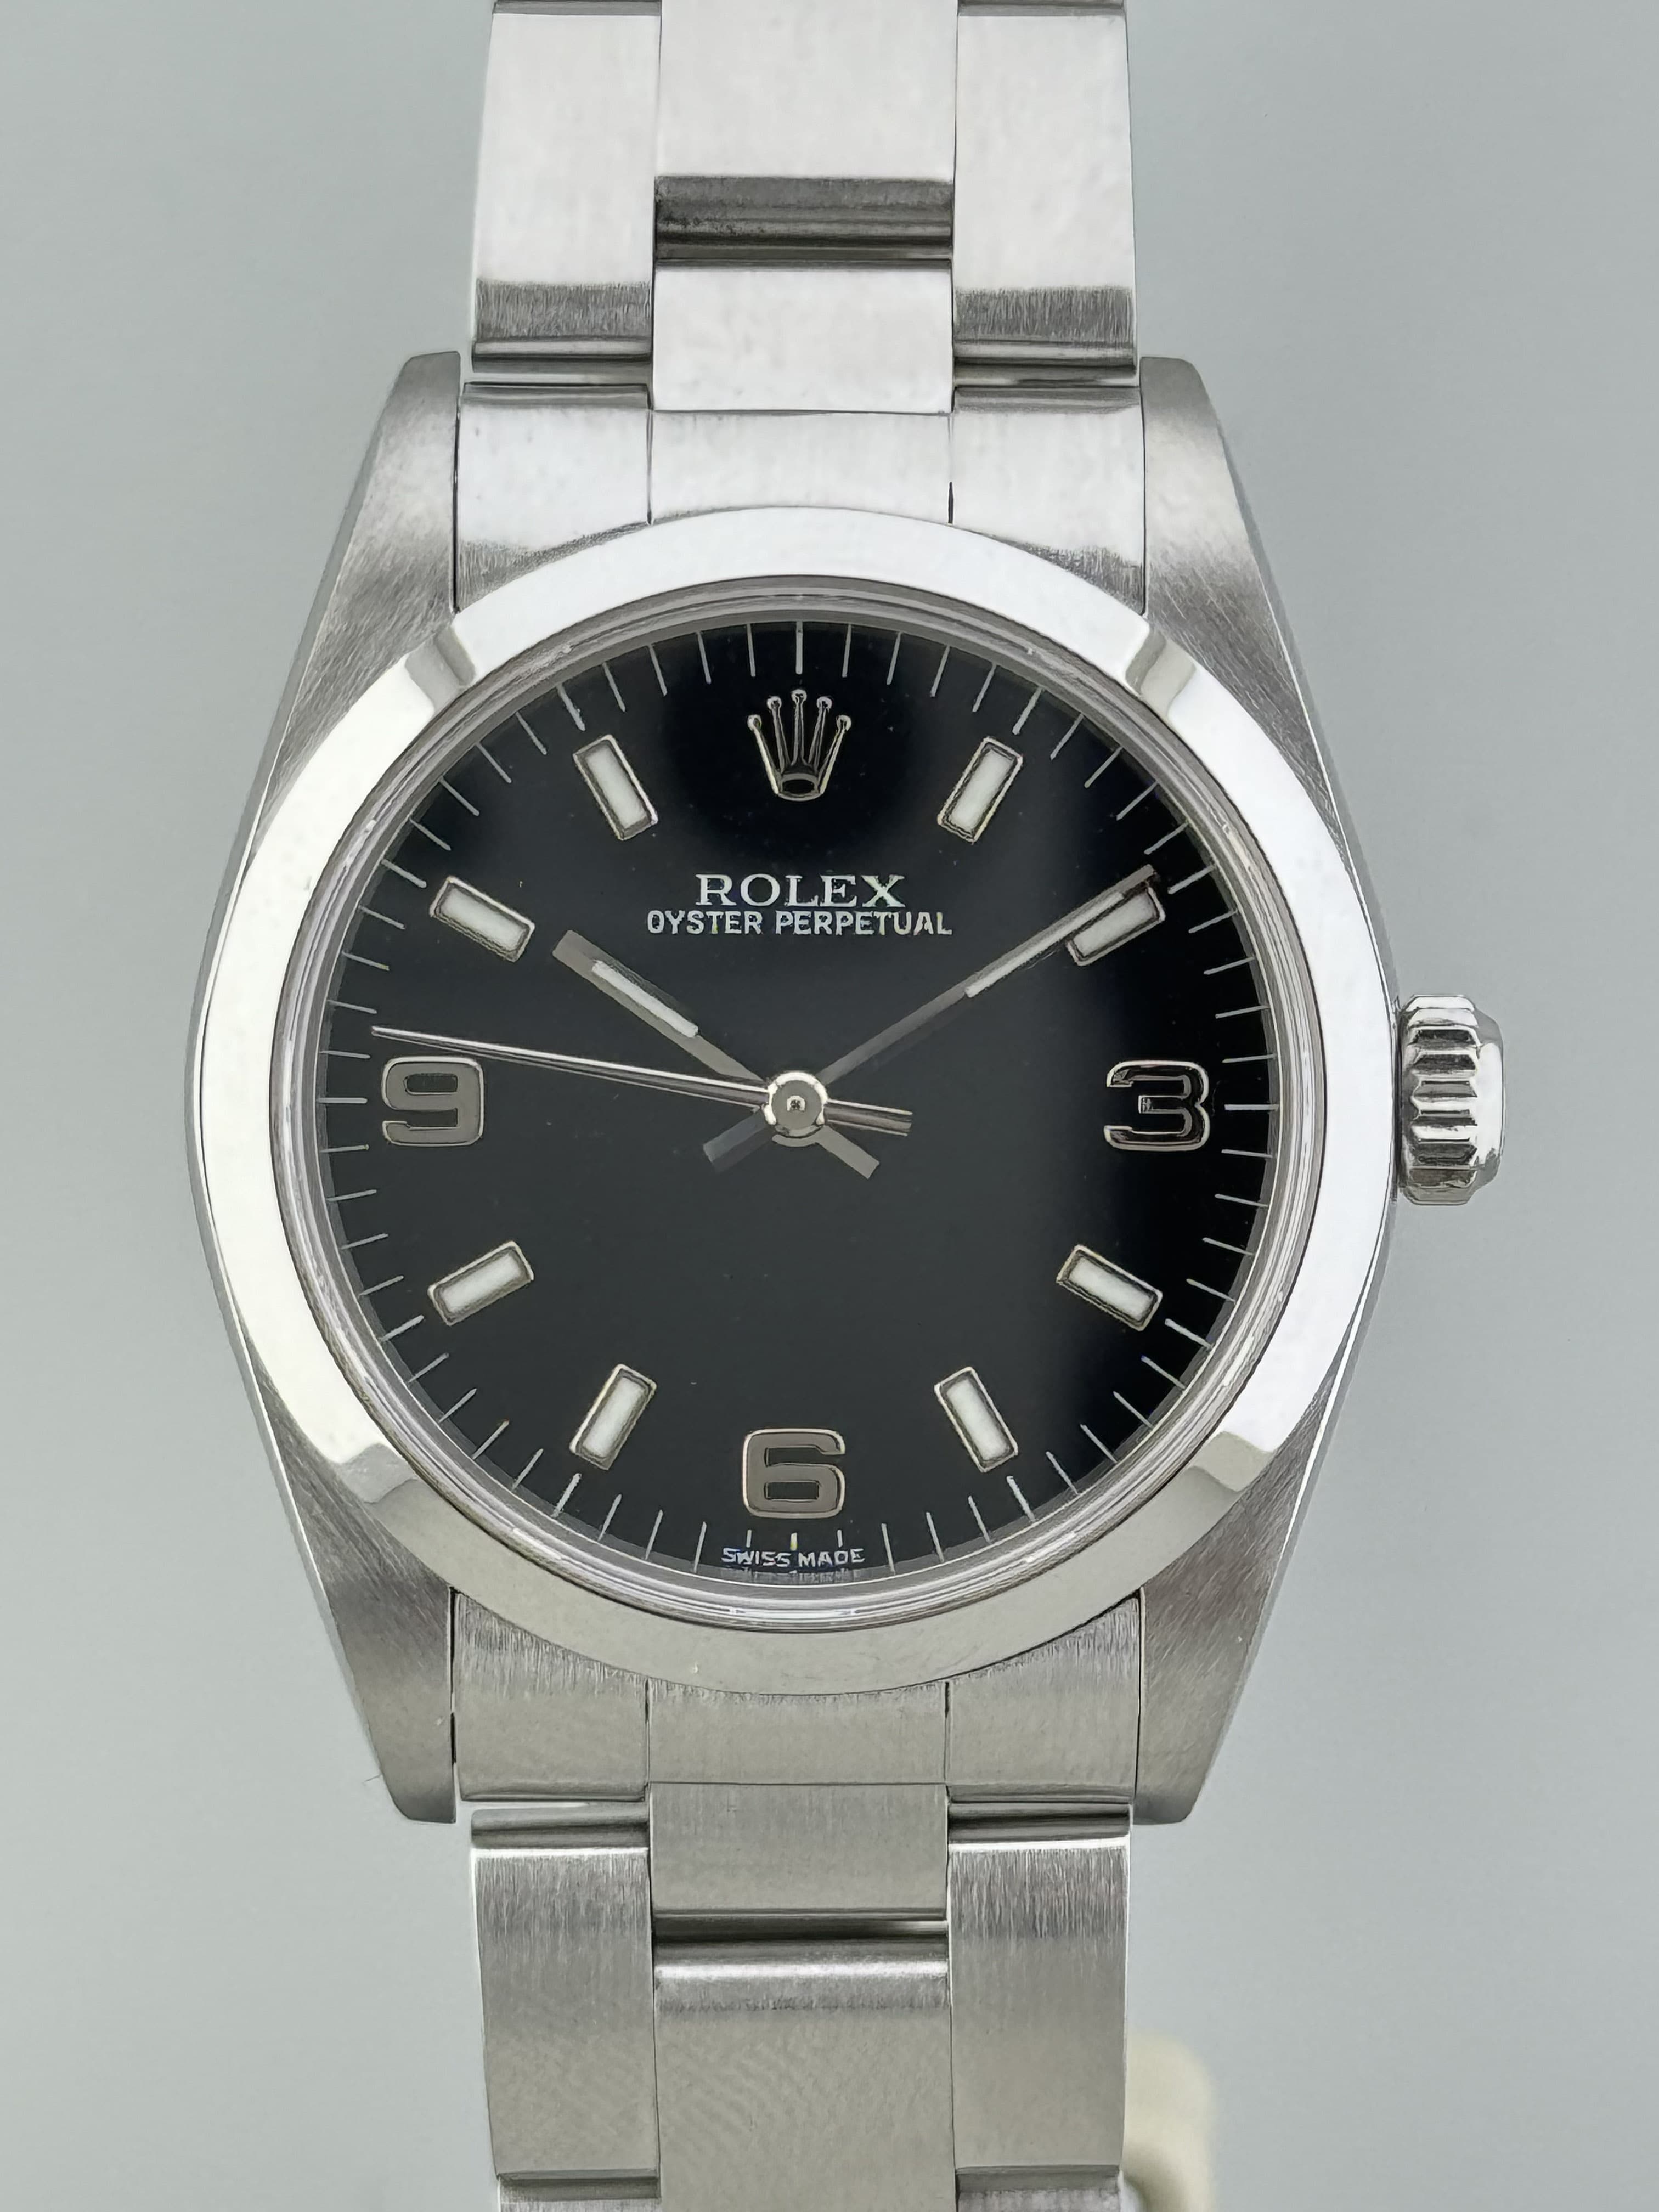 Rolex Oyster Perpetual Medio 31 ref. 77080 | Foto frontale